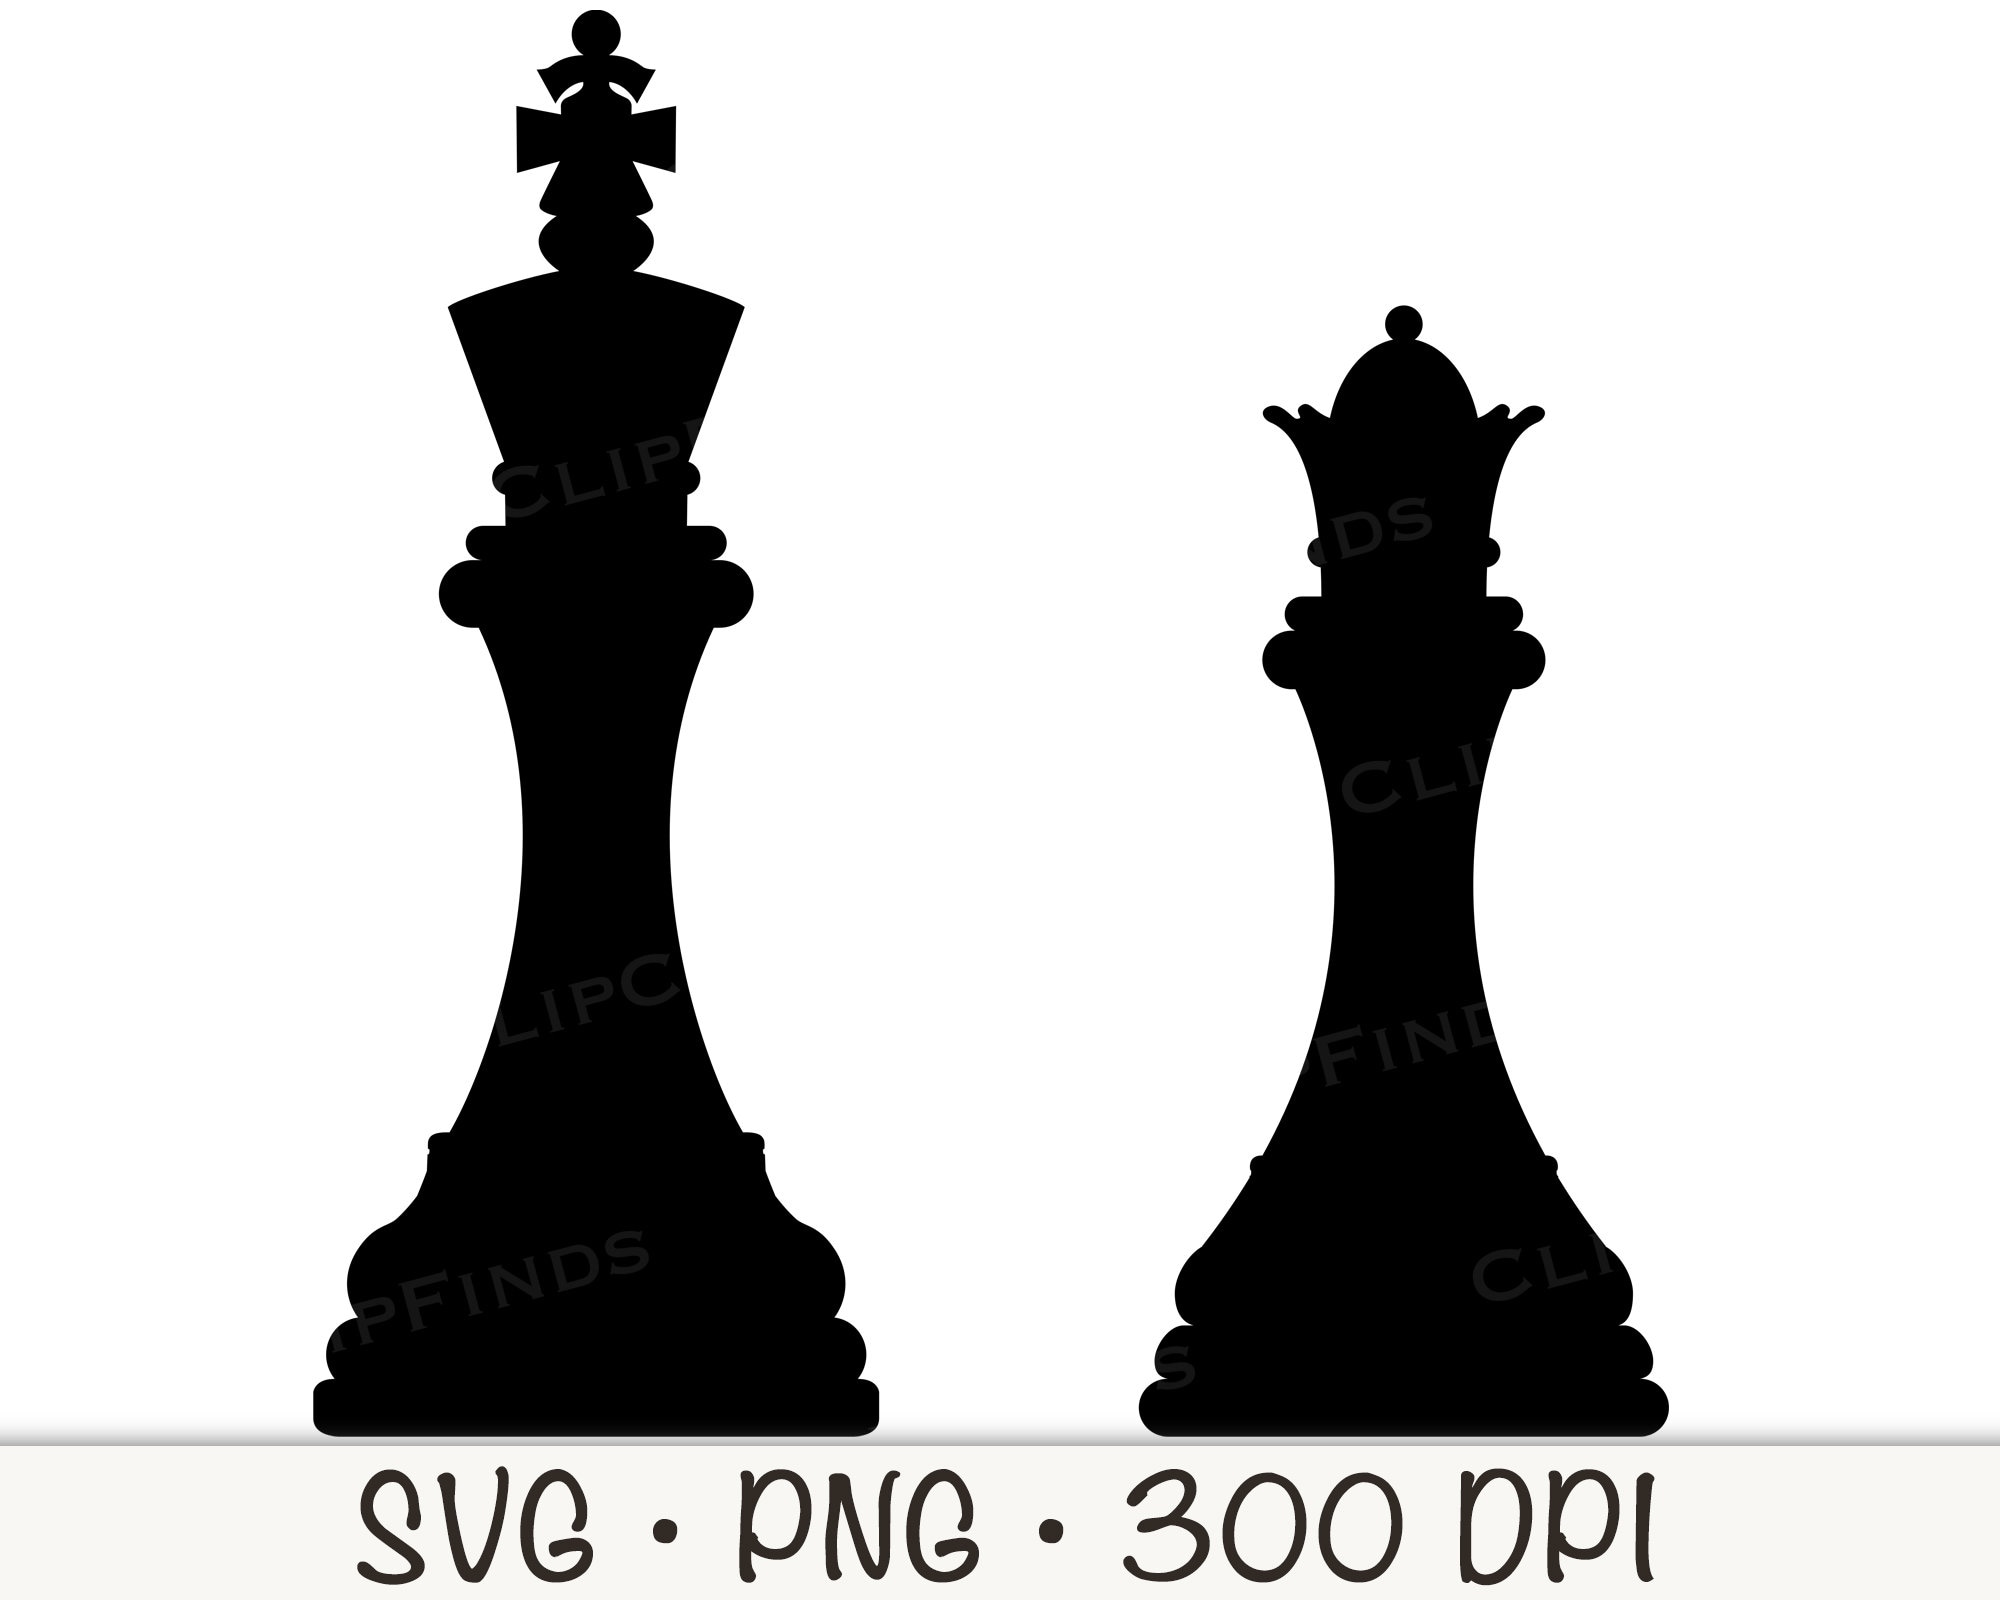 Black Queen Chess Images  Free Photos, PNG Stickers, Wallpapers